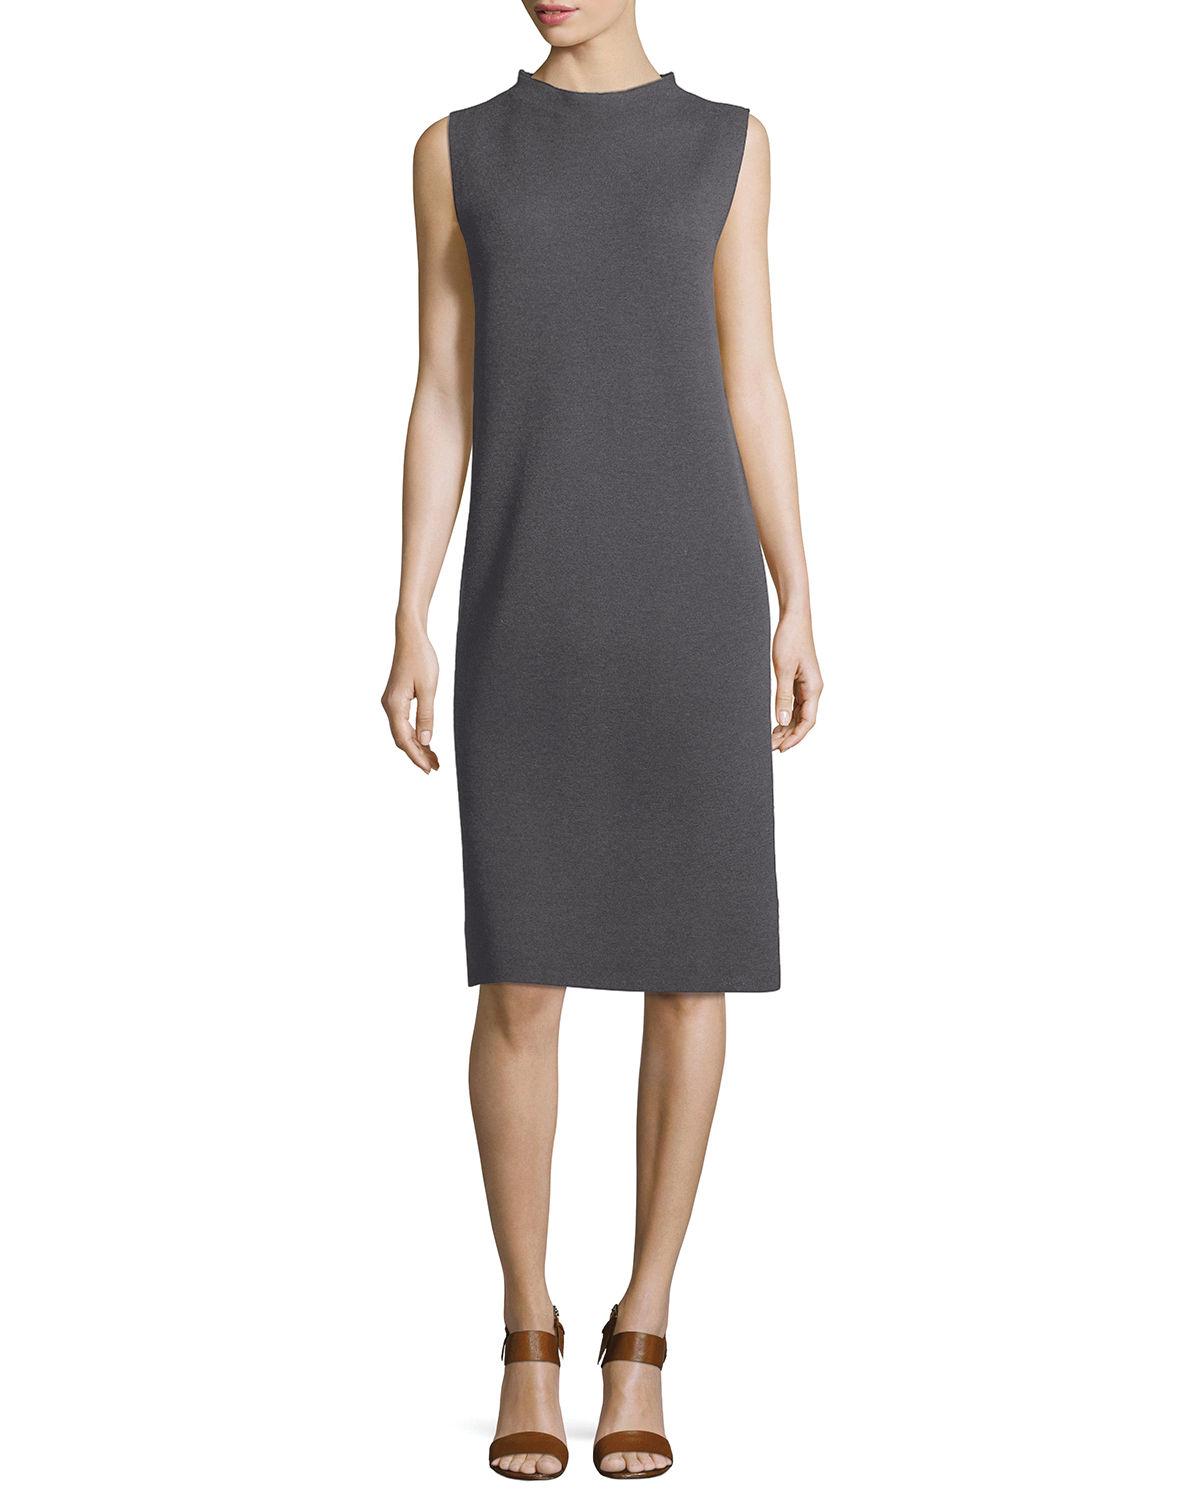 Lyst - Eileen Fisher Sleeveless Funnel-neck Washable Wool Crepe Dress ...